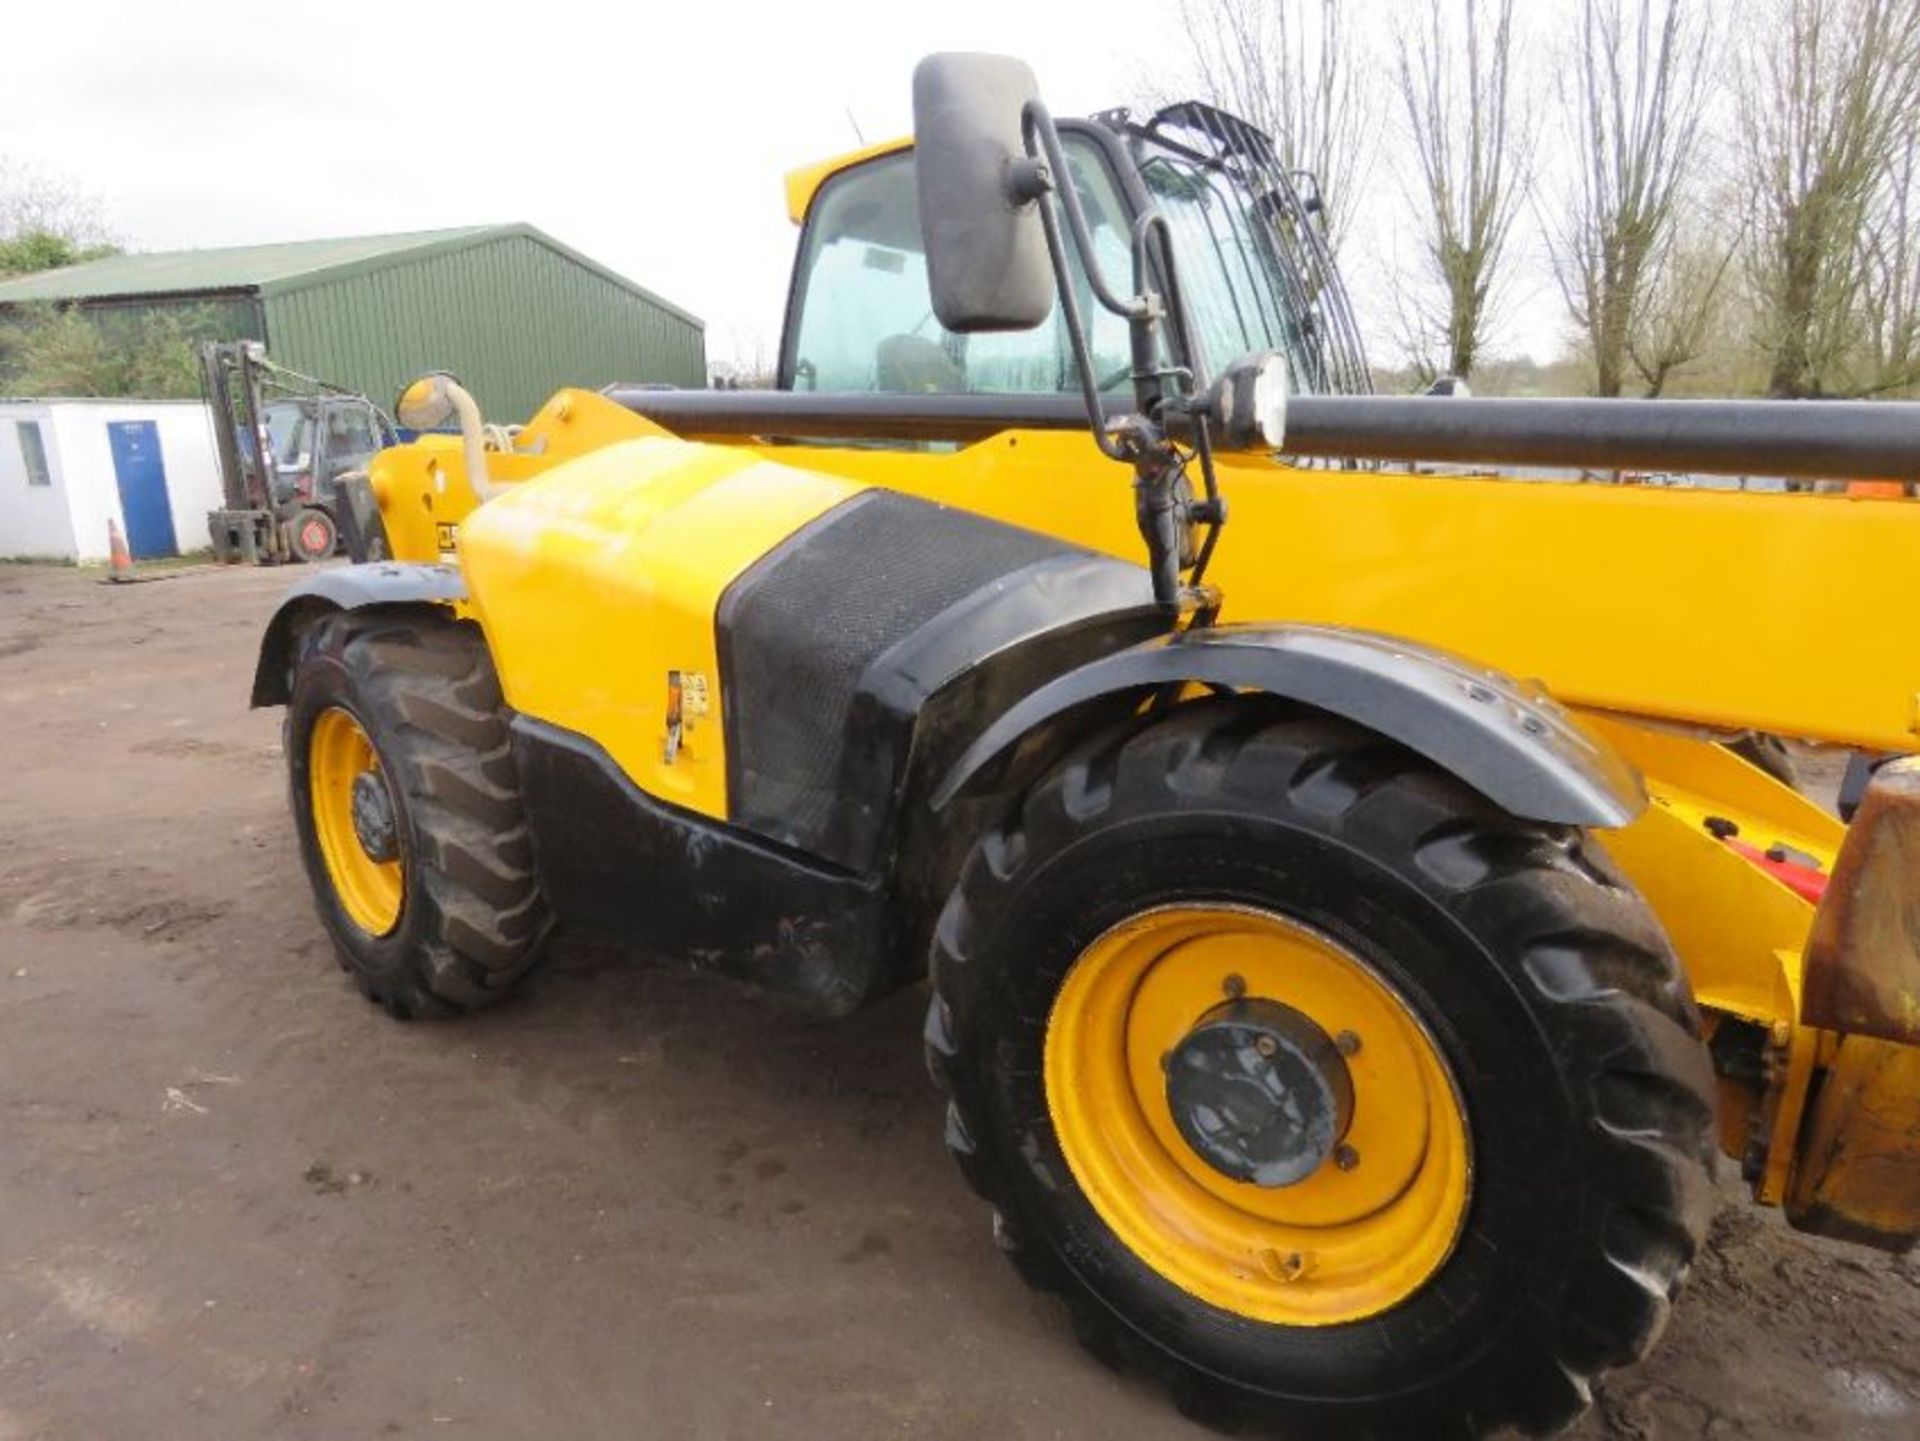 JCB 540-140 TELEHANDLER REG:RV17 YGT WITH V5. 14METRE REACH, 4 TONNE LIFT OWNED FROM NEW BY THE COMP - Image 23 of 23